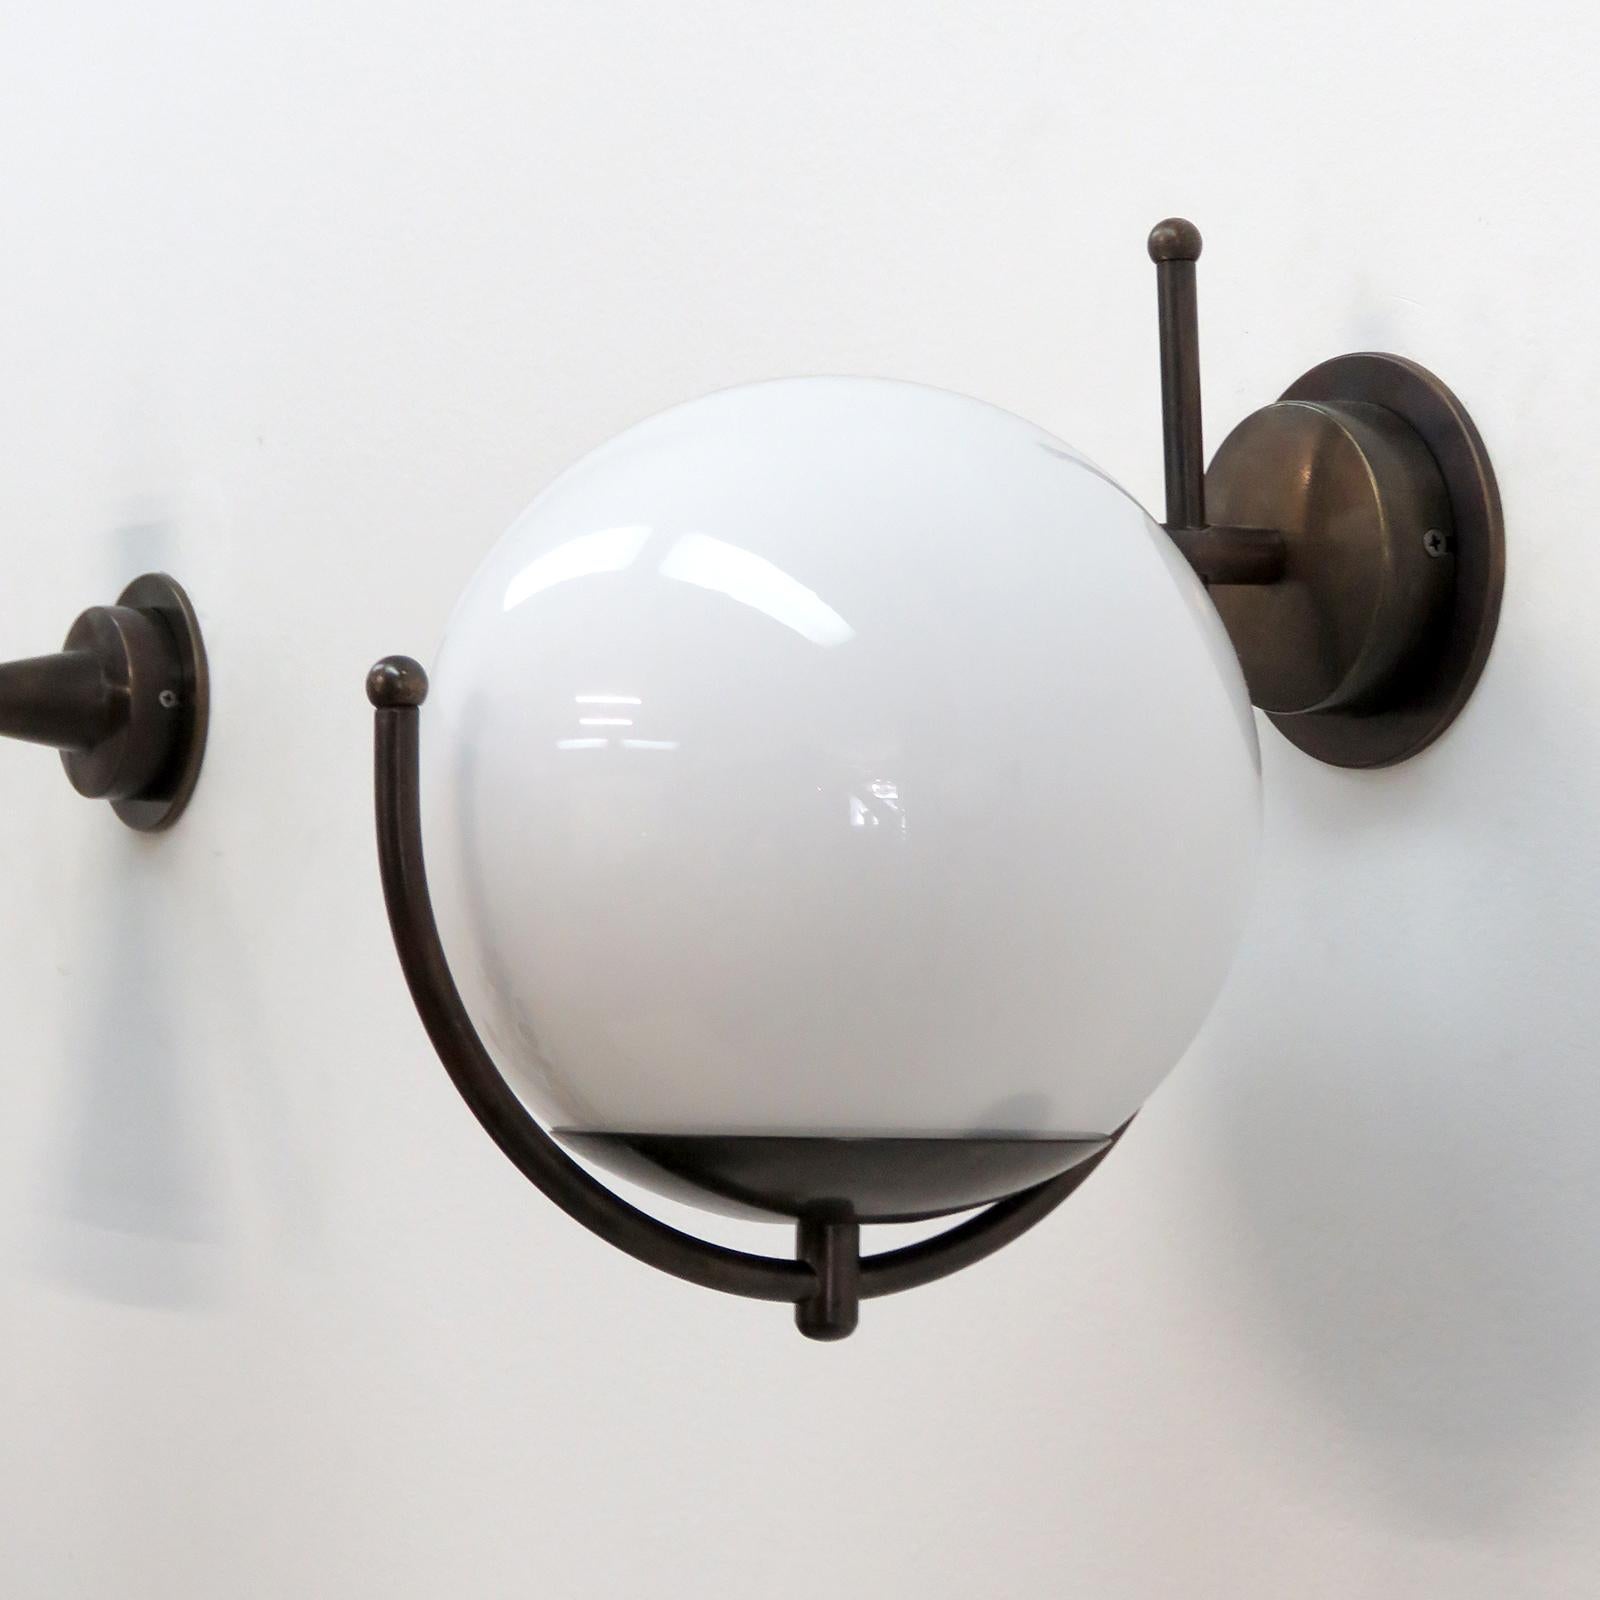 Wonderful Italian wall lights with a large glass globe perched on a patinaed brass framework, wired for US standards or European standards (110v/240v), one E27 socket, max. wattage 75w, bulb provided as a onetime courtesy. Priced individually.